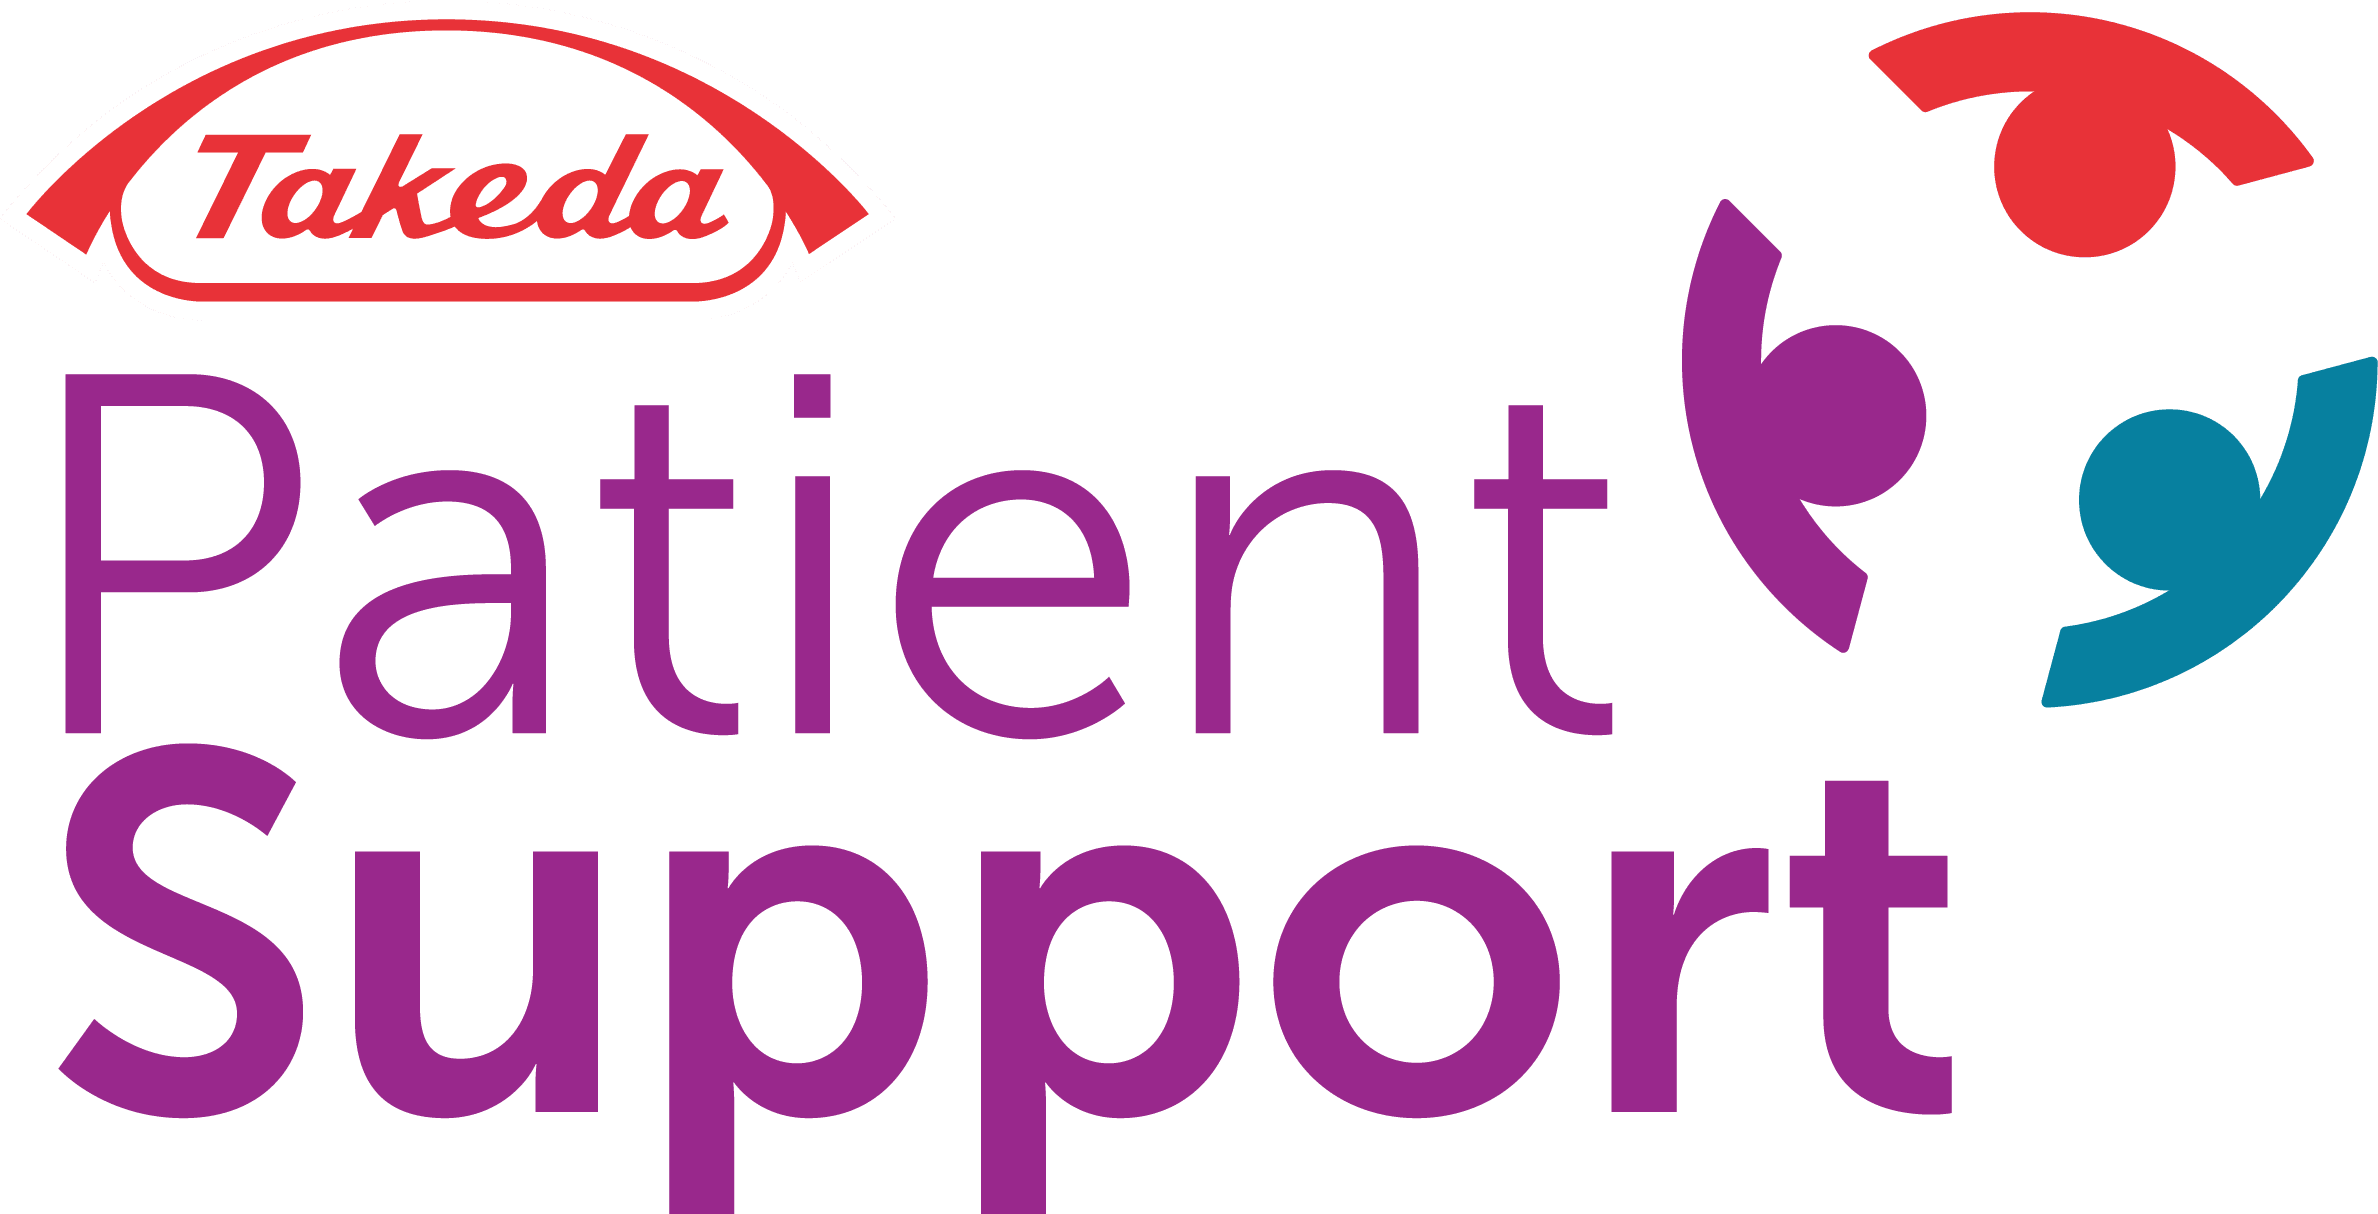 Takeda Patient Support logo.